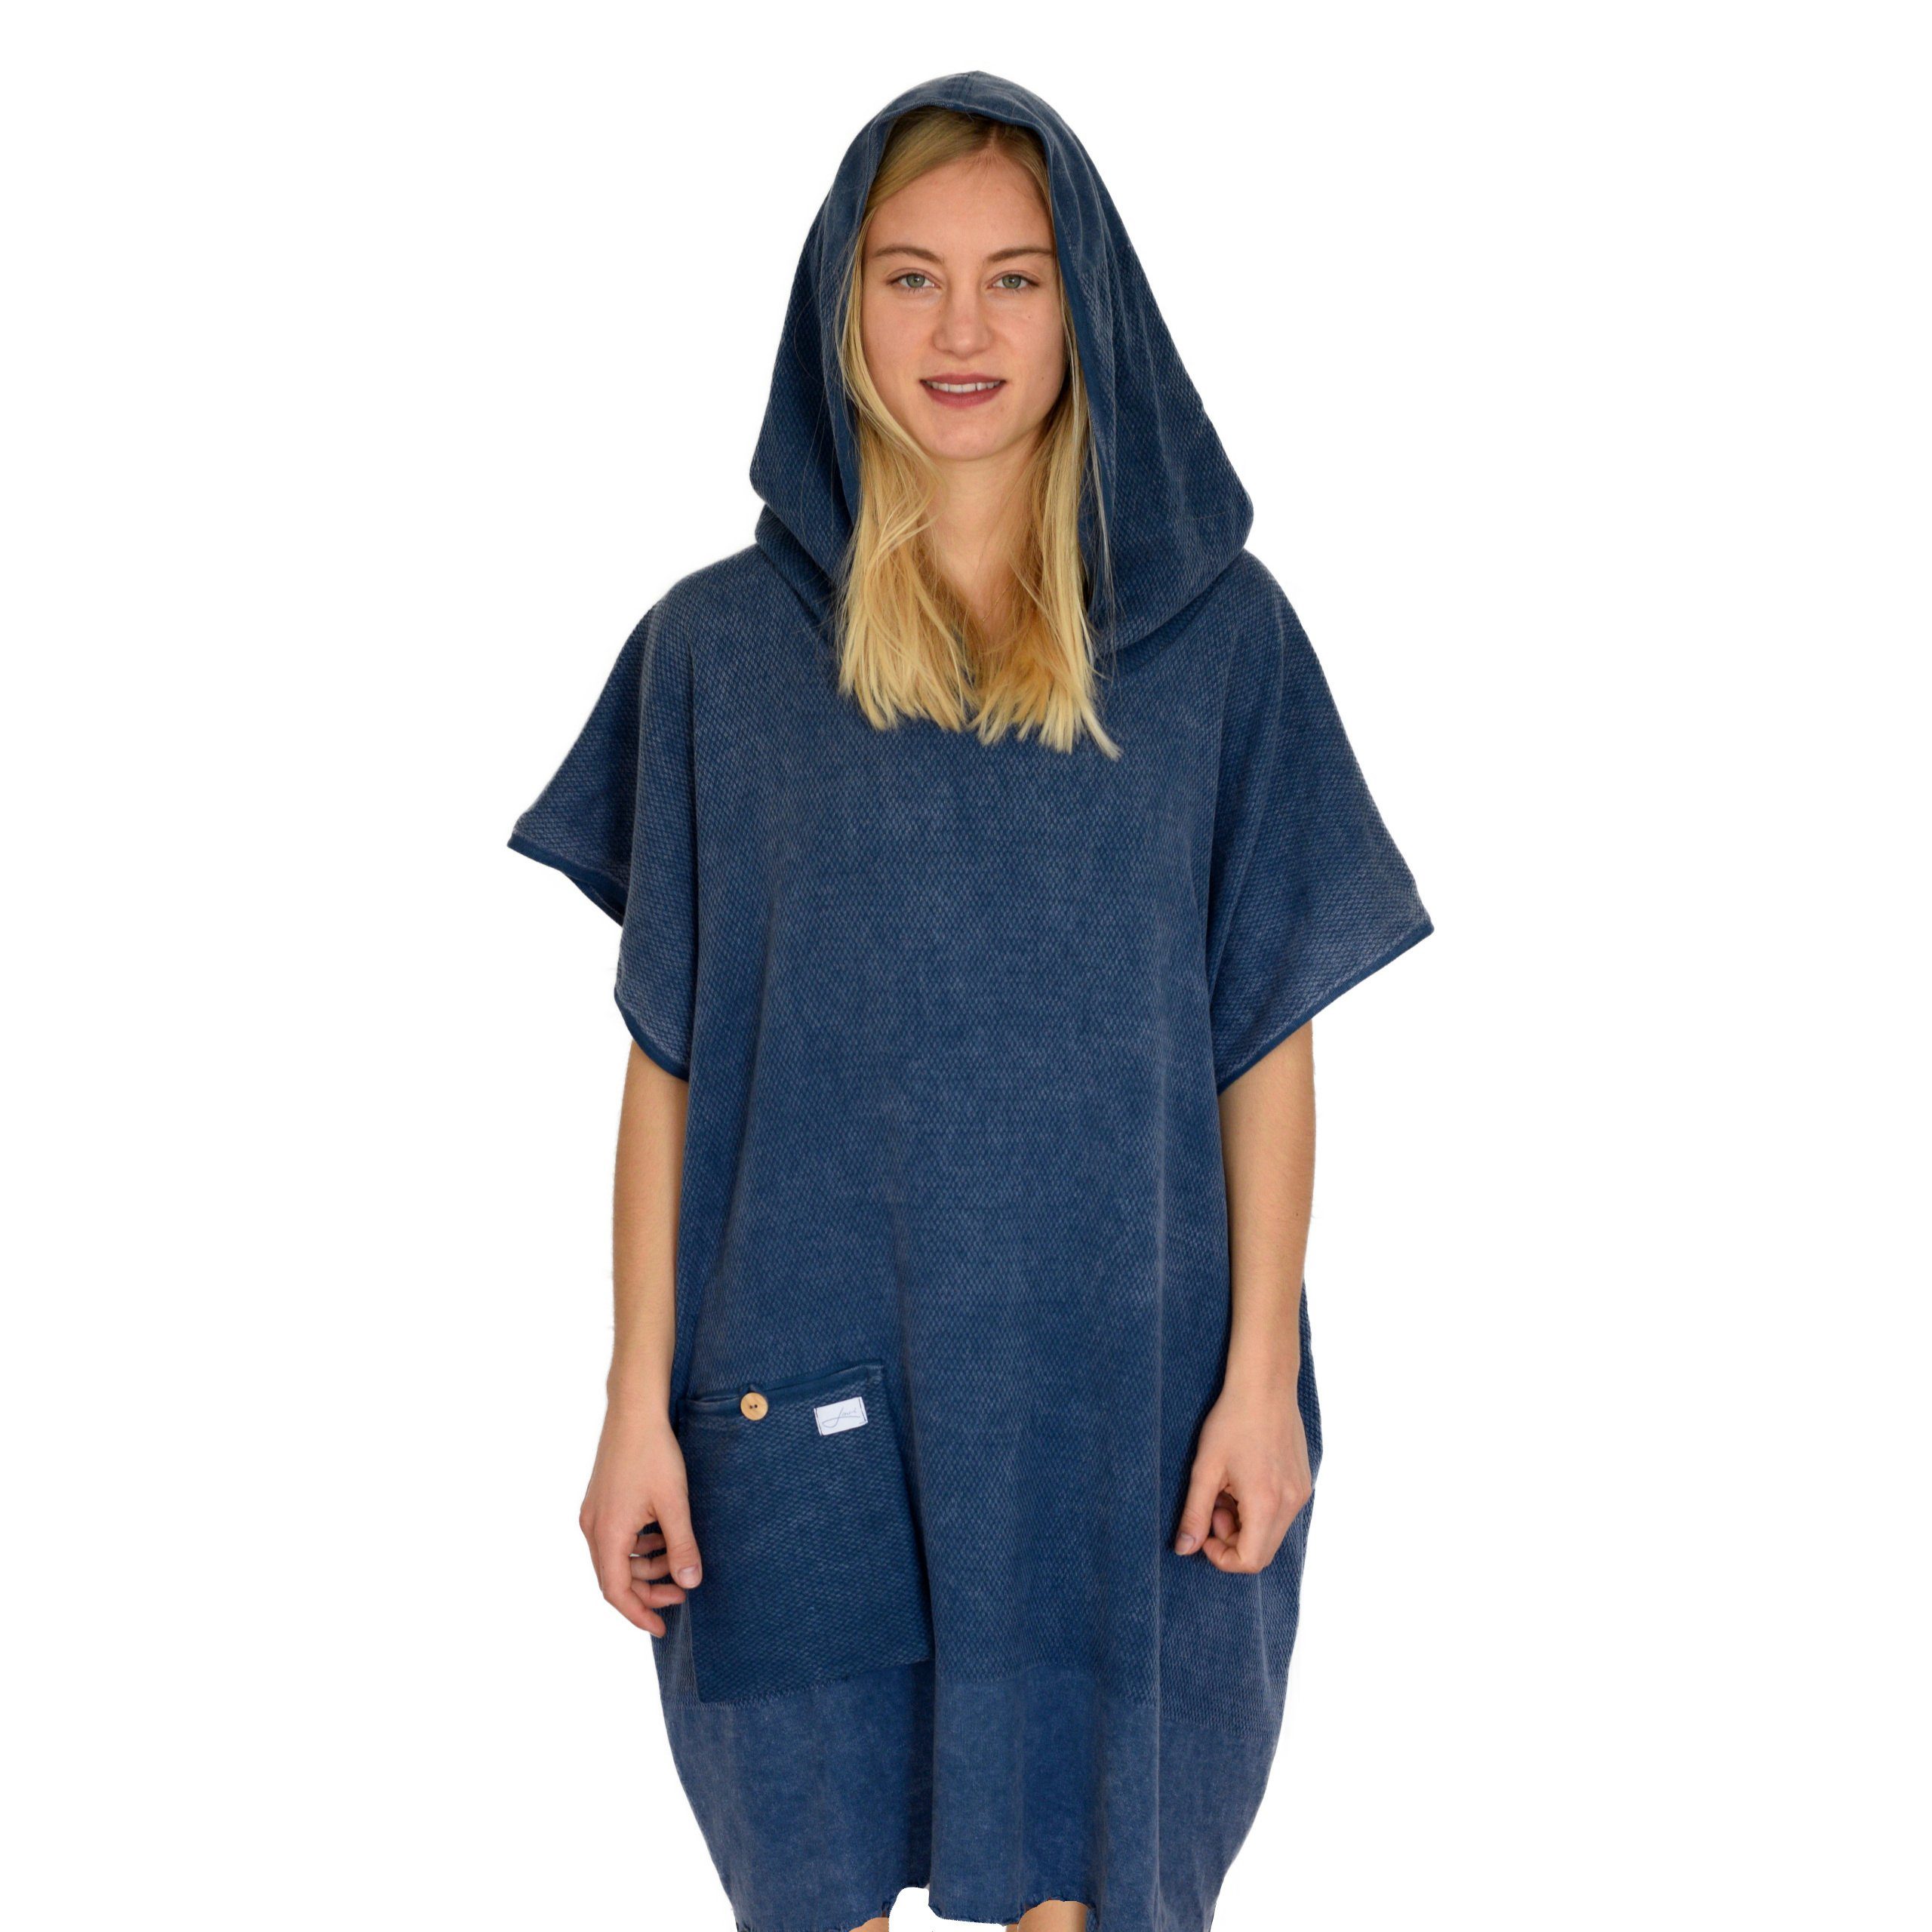 Lou-i Kapuze & Germany Badeponcho blau (leicht schnell trocken), in Badeponcho Surfponcho Made